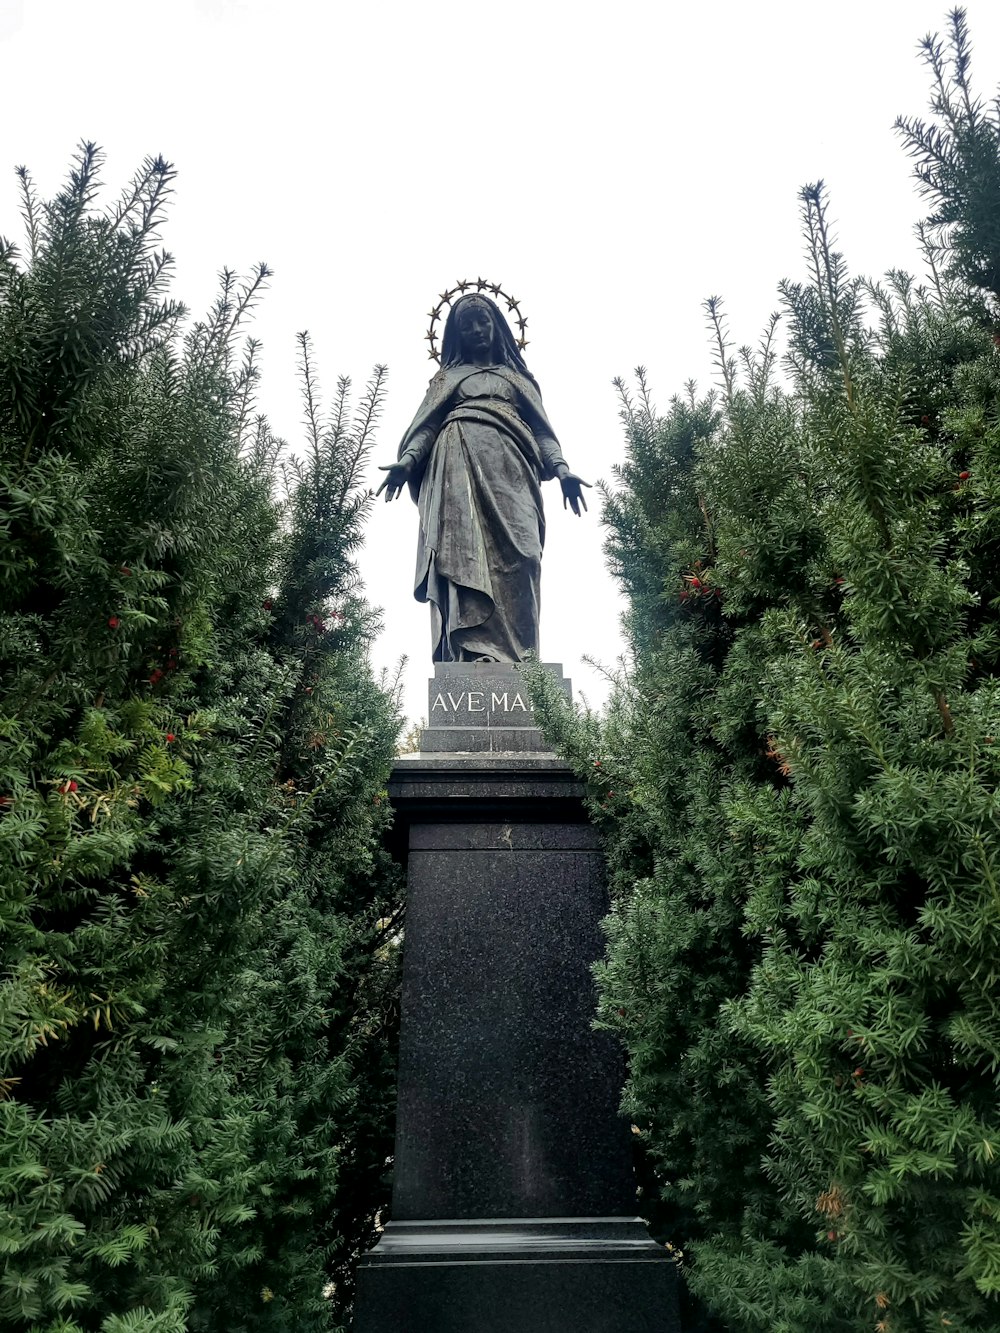 a statue of jesus surrounded by trees and bushes